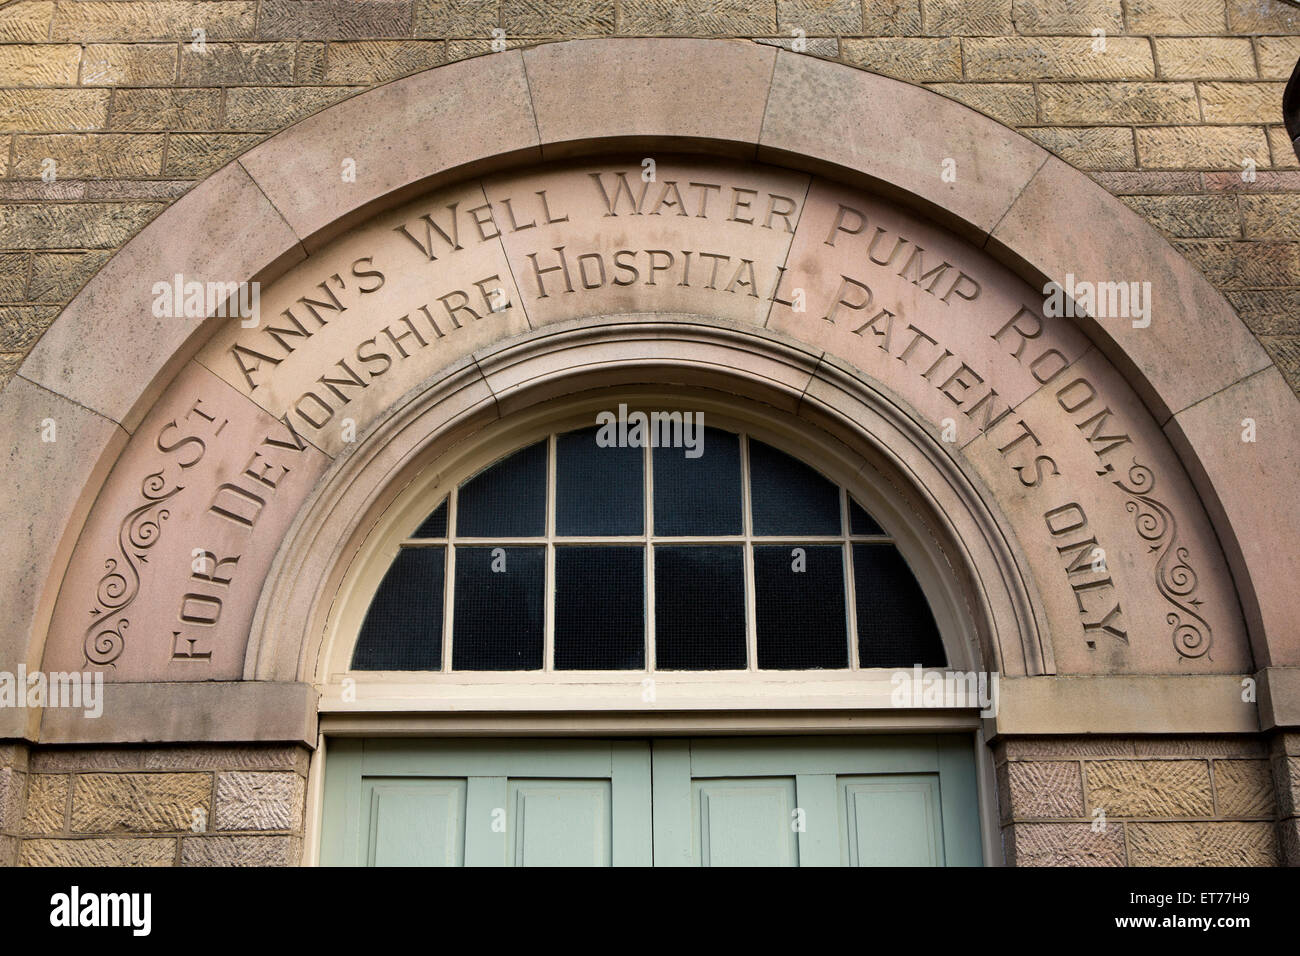 UK, England, Derbyshire, Buxton, Old Devonshire Hospital St Anne’s Well Pump Room sign Stock Photo